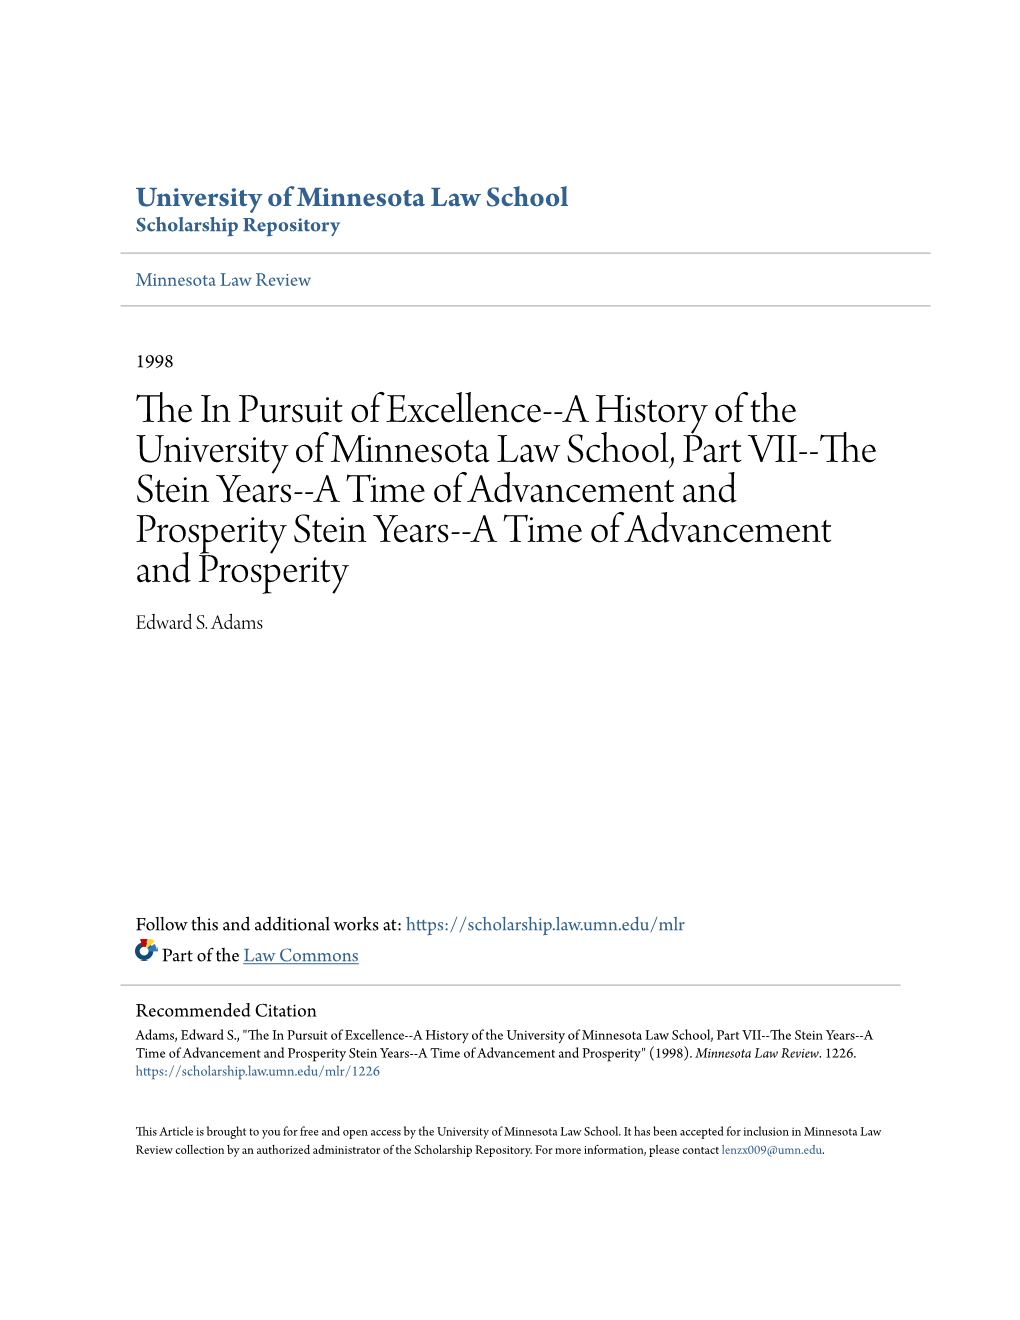 A History of the University of Minnesota Law School, Part